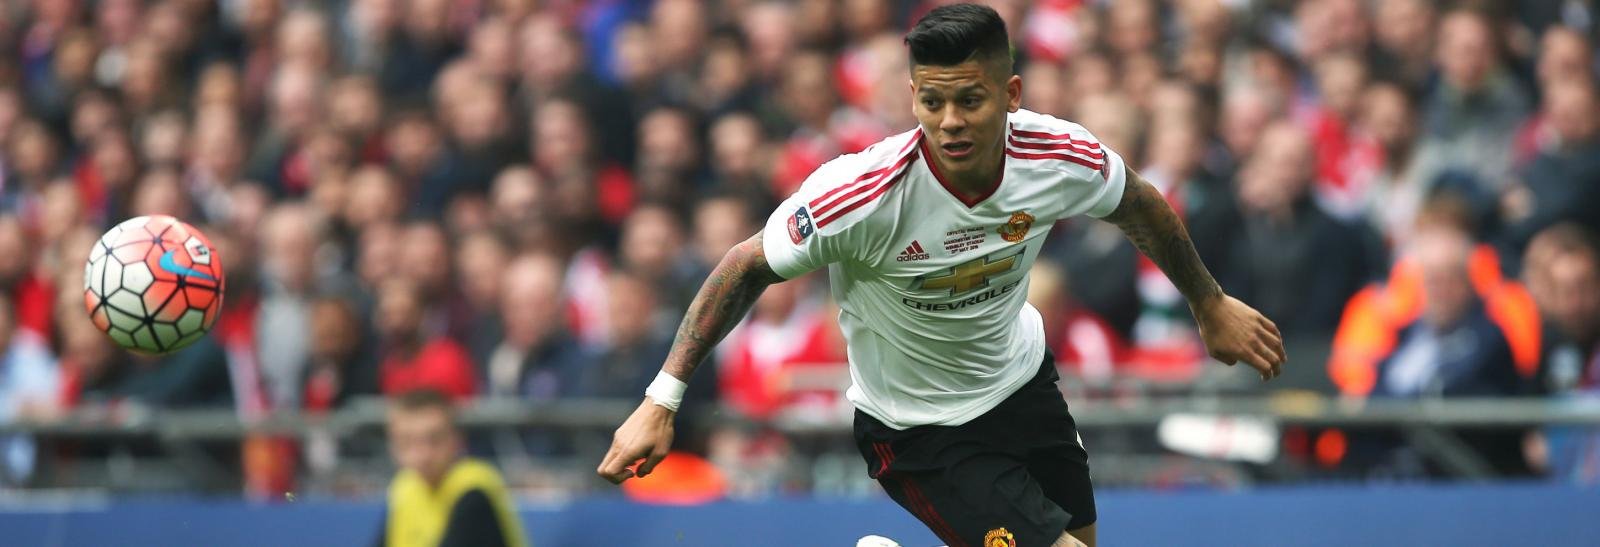 Manchester United’s £16m full-back could be loaned out to Villarreal